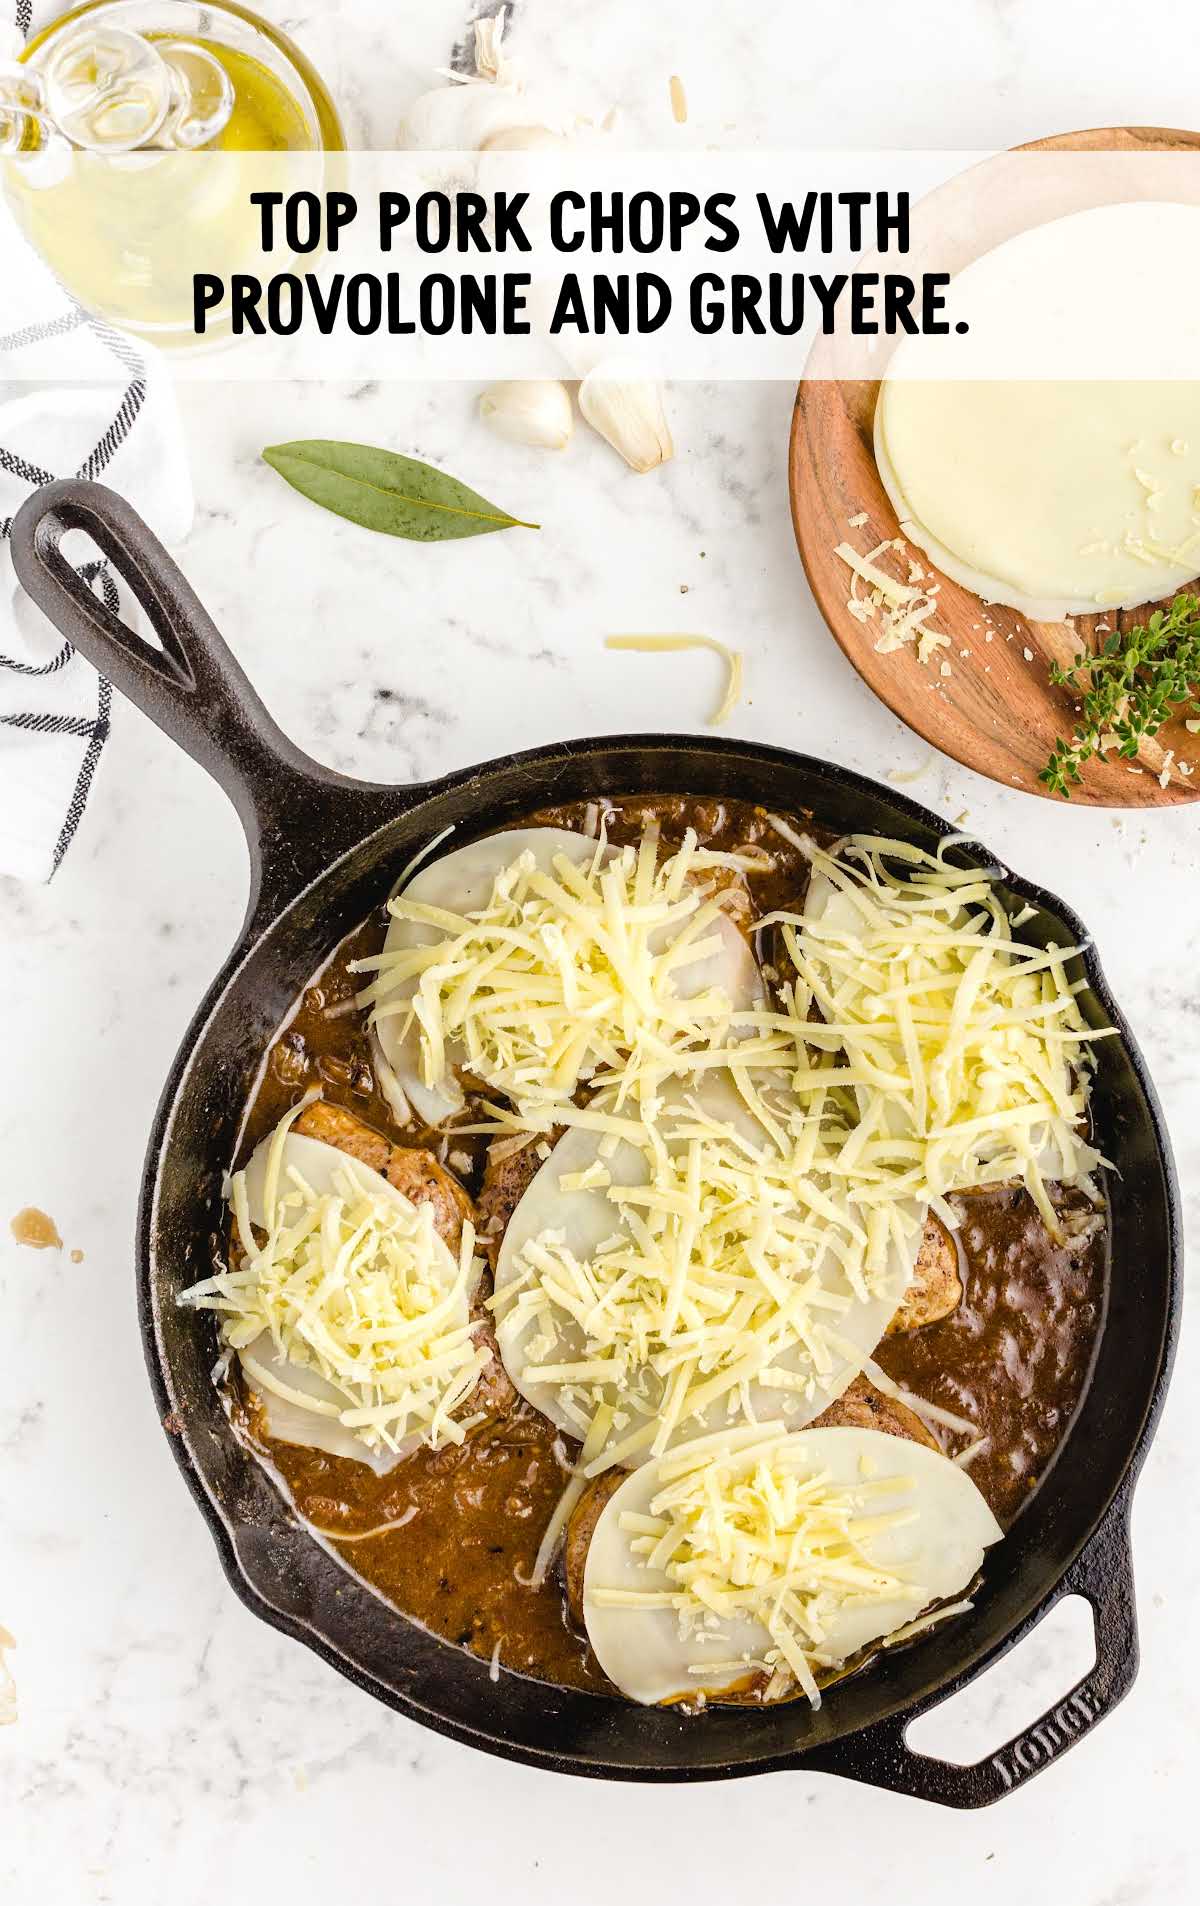 pork chops topped with provolone and gruyere in a skillet